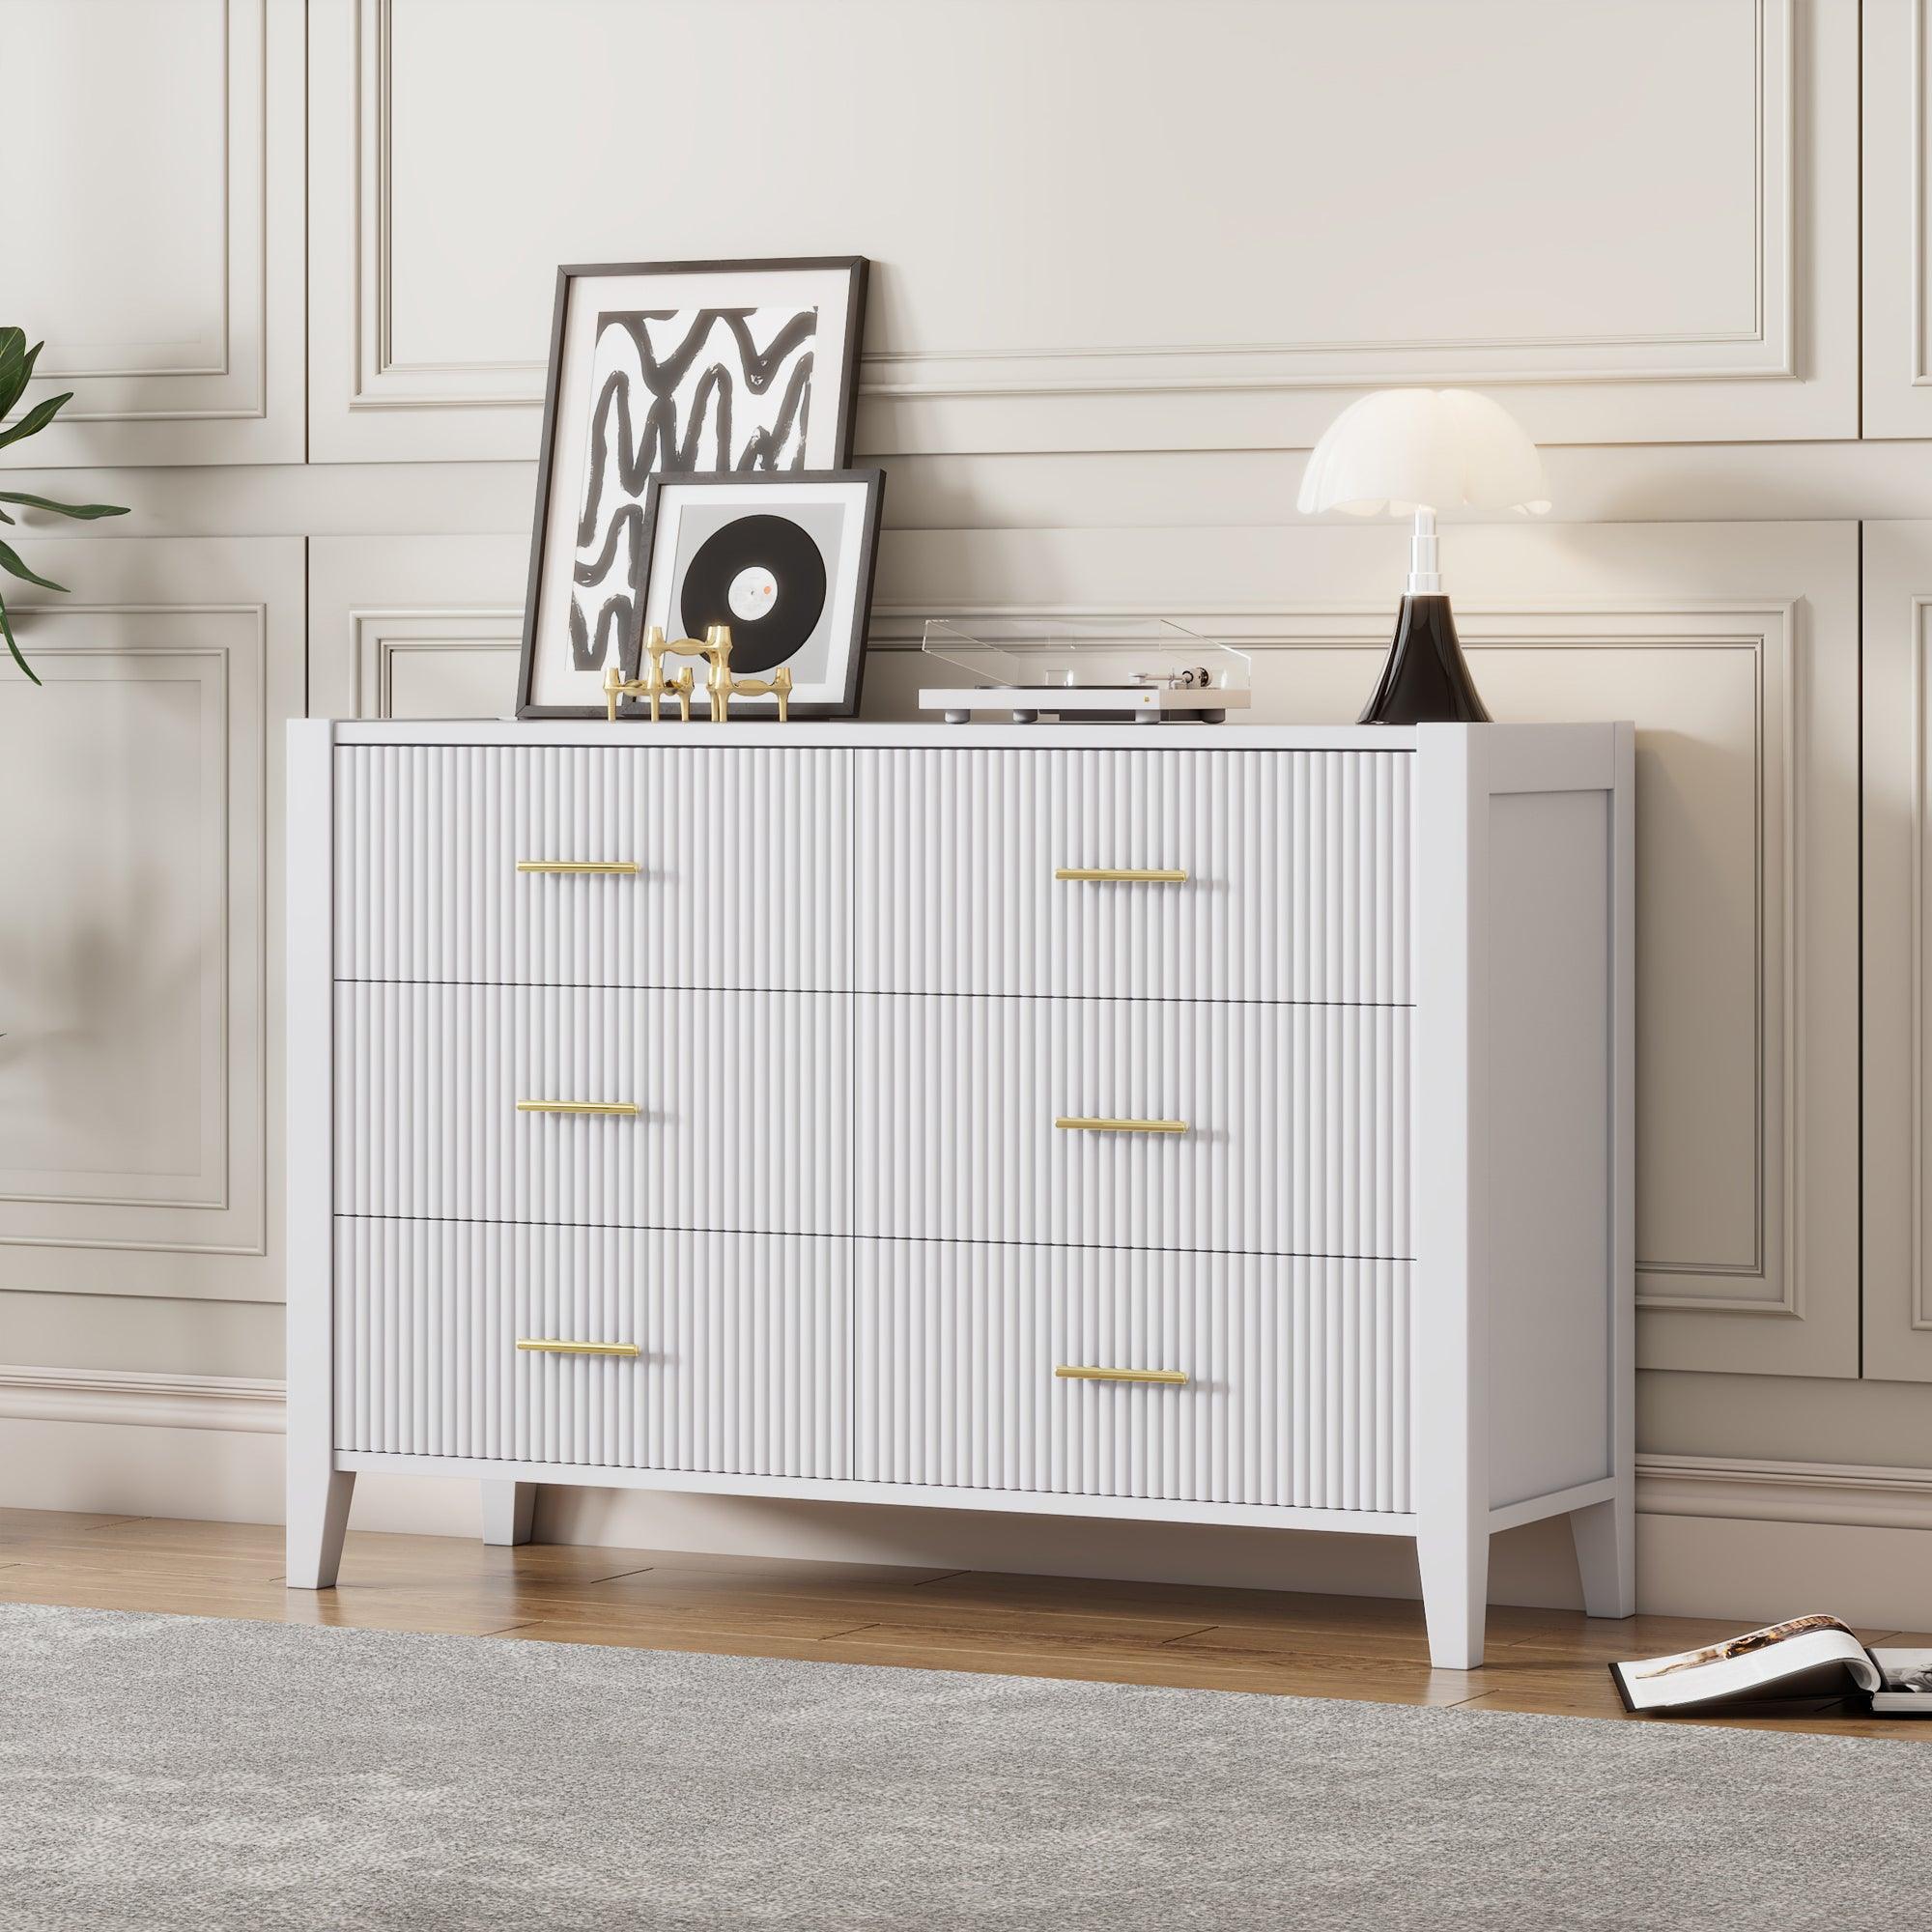 🆓🚛 6 Drawer Dresser With Metal Handle for Bedroom, Storage Cabinet With Vertical Stripe Finish Drawer, White (Passed Astm F2057-23 Test)